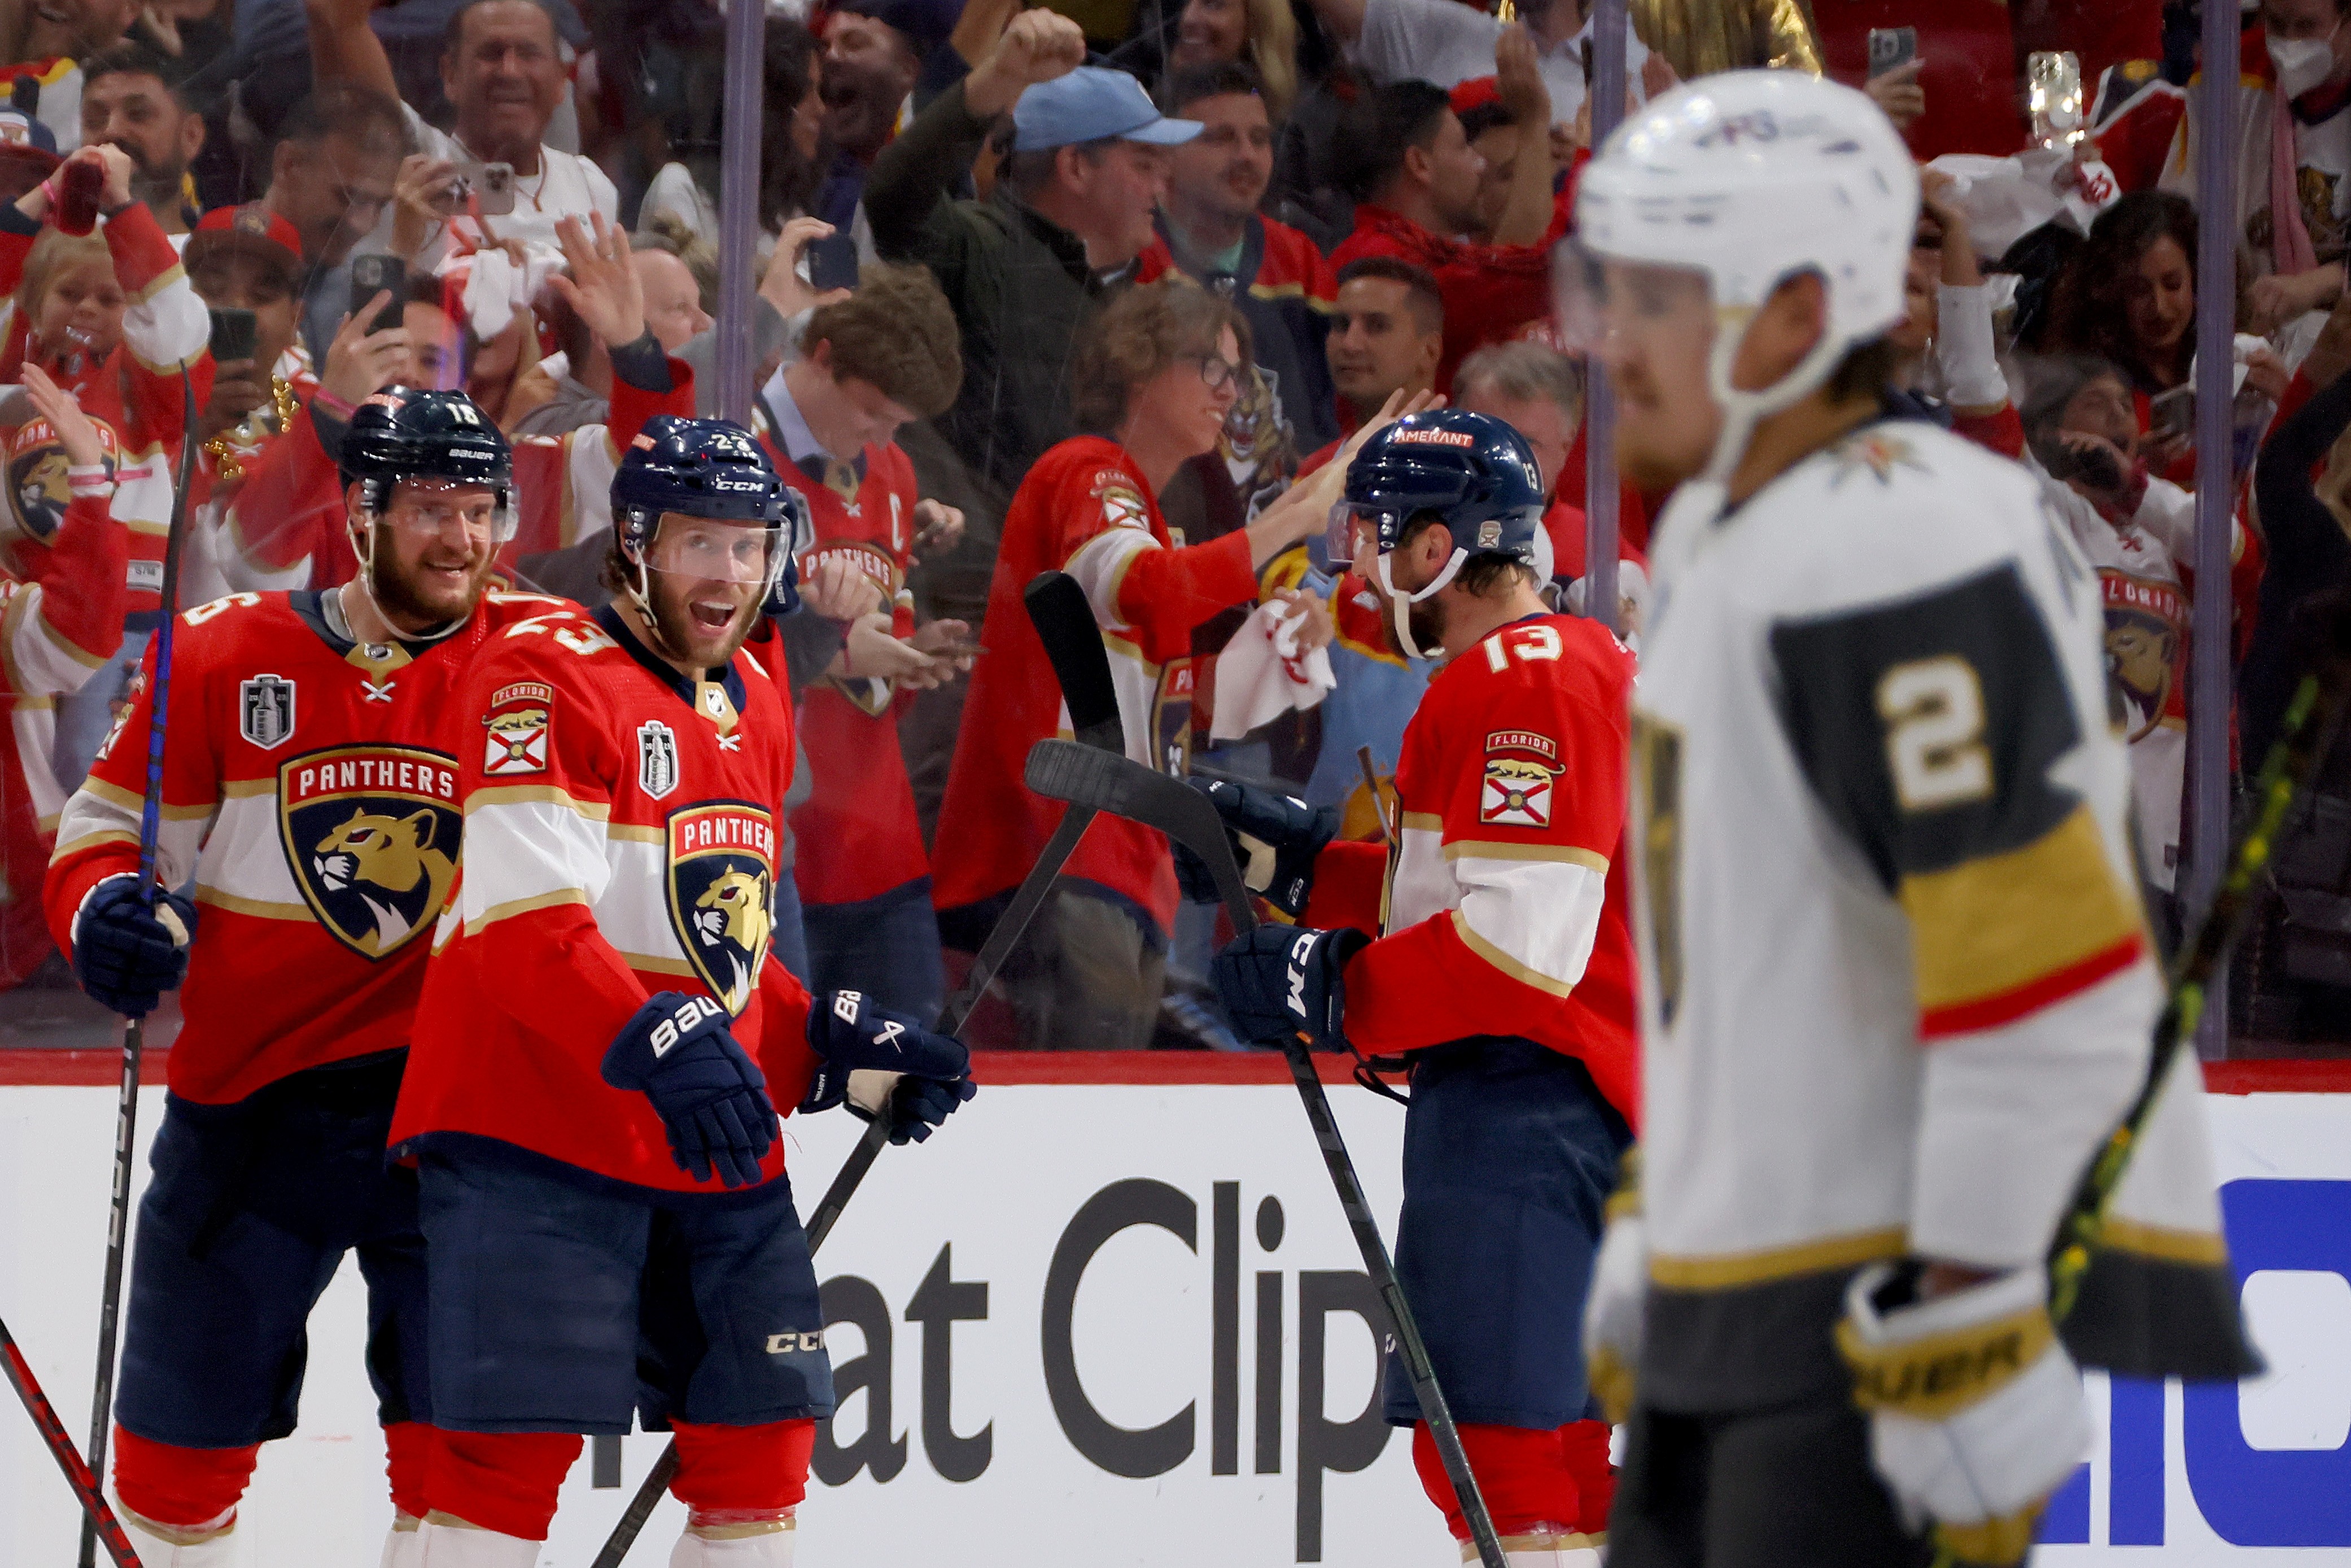 https://media1.miaminewtimes.com/mia/imager/u/original/17163658/bruce-bennett-for-getty---florida-panthers---stanley-cup-fin.jpg